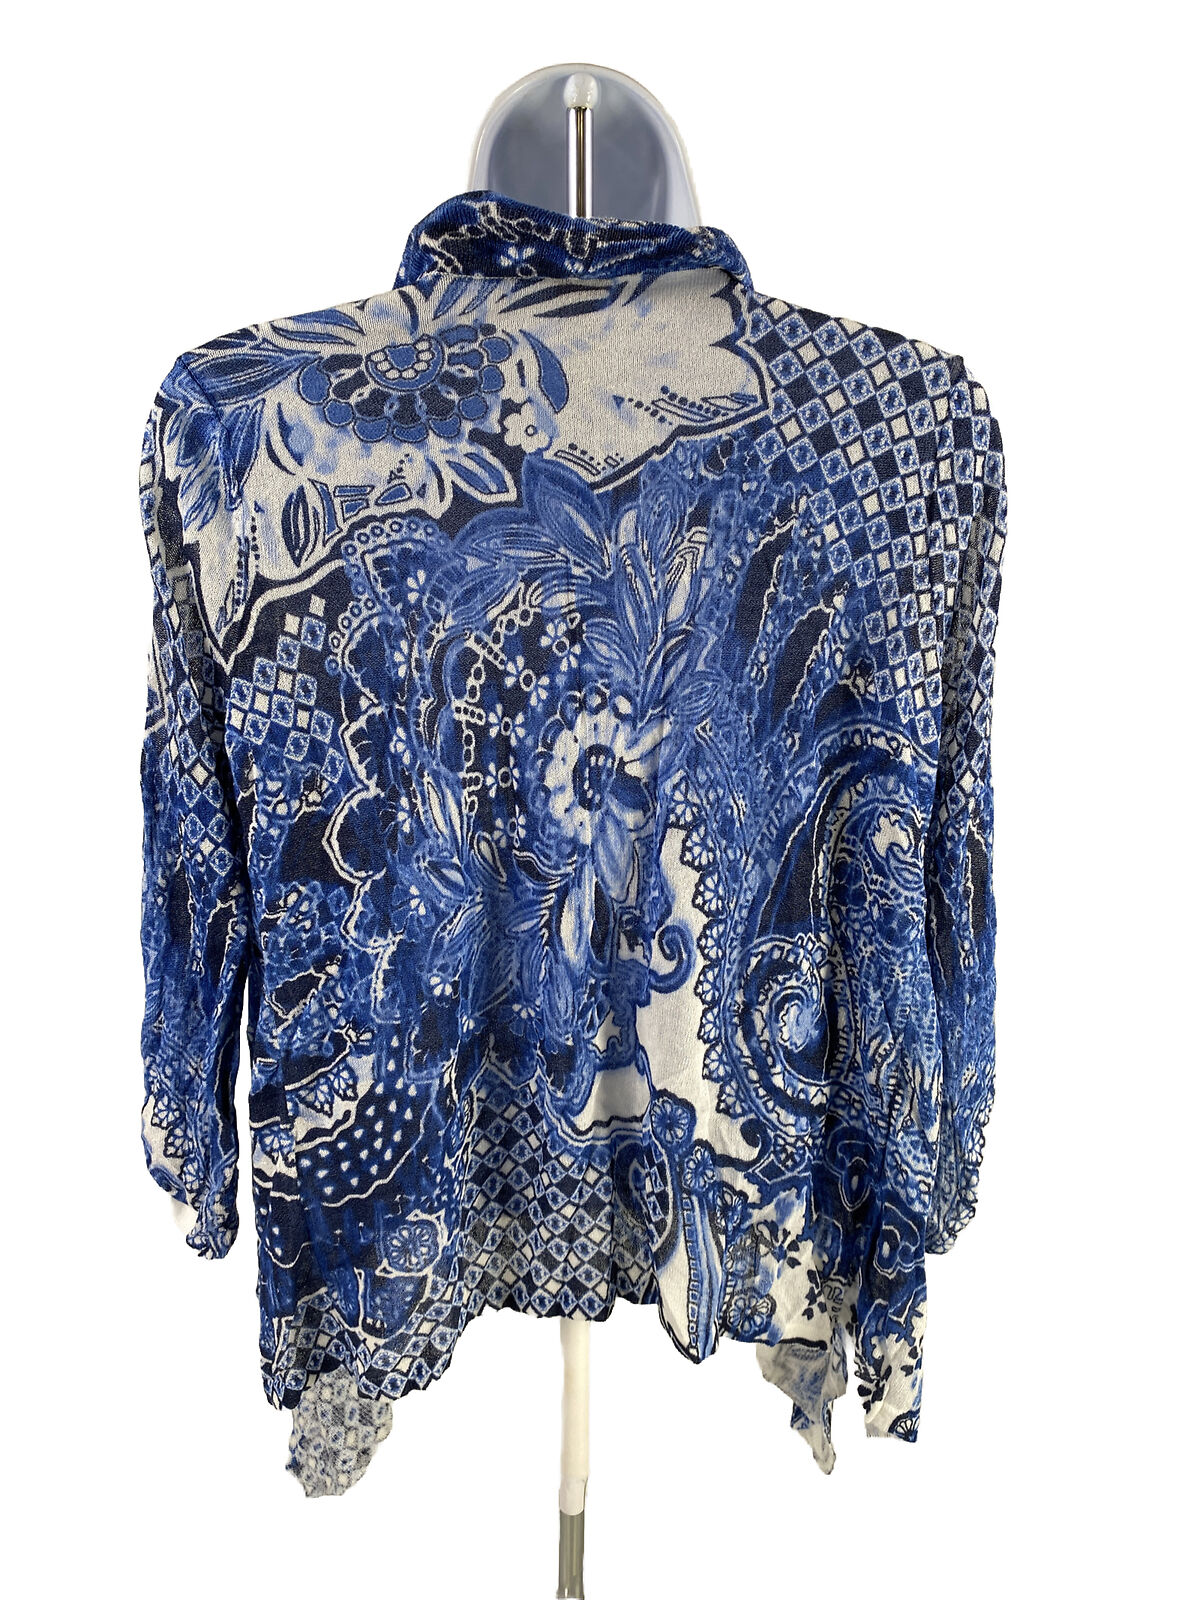 Chico's Women's Blue Floral 3/4 Sleeve Thin Knit Cardigan Sweater - 0/S